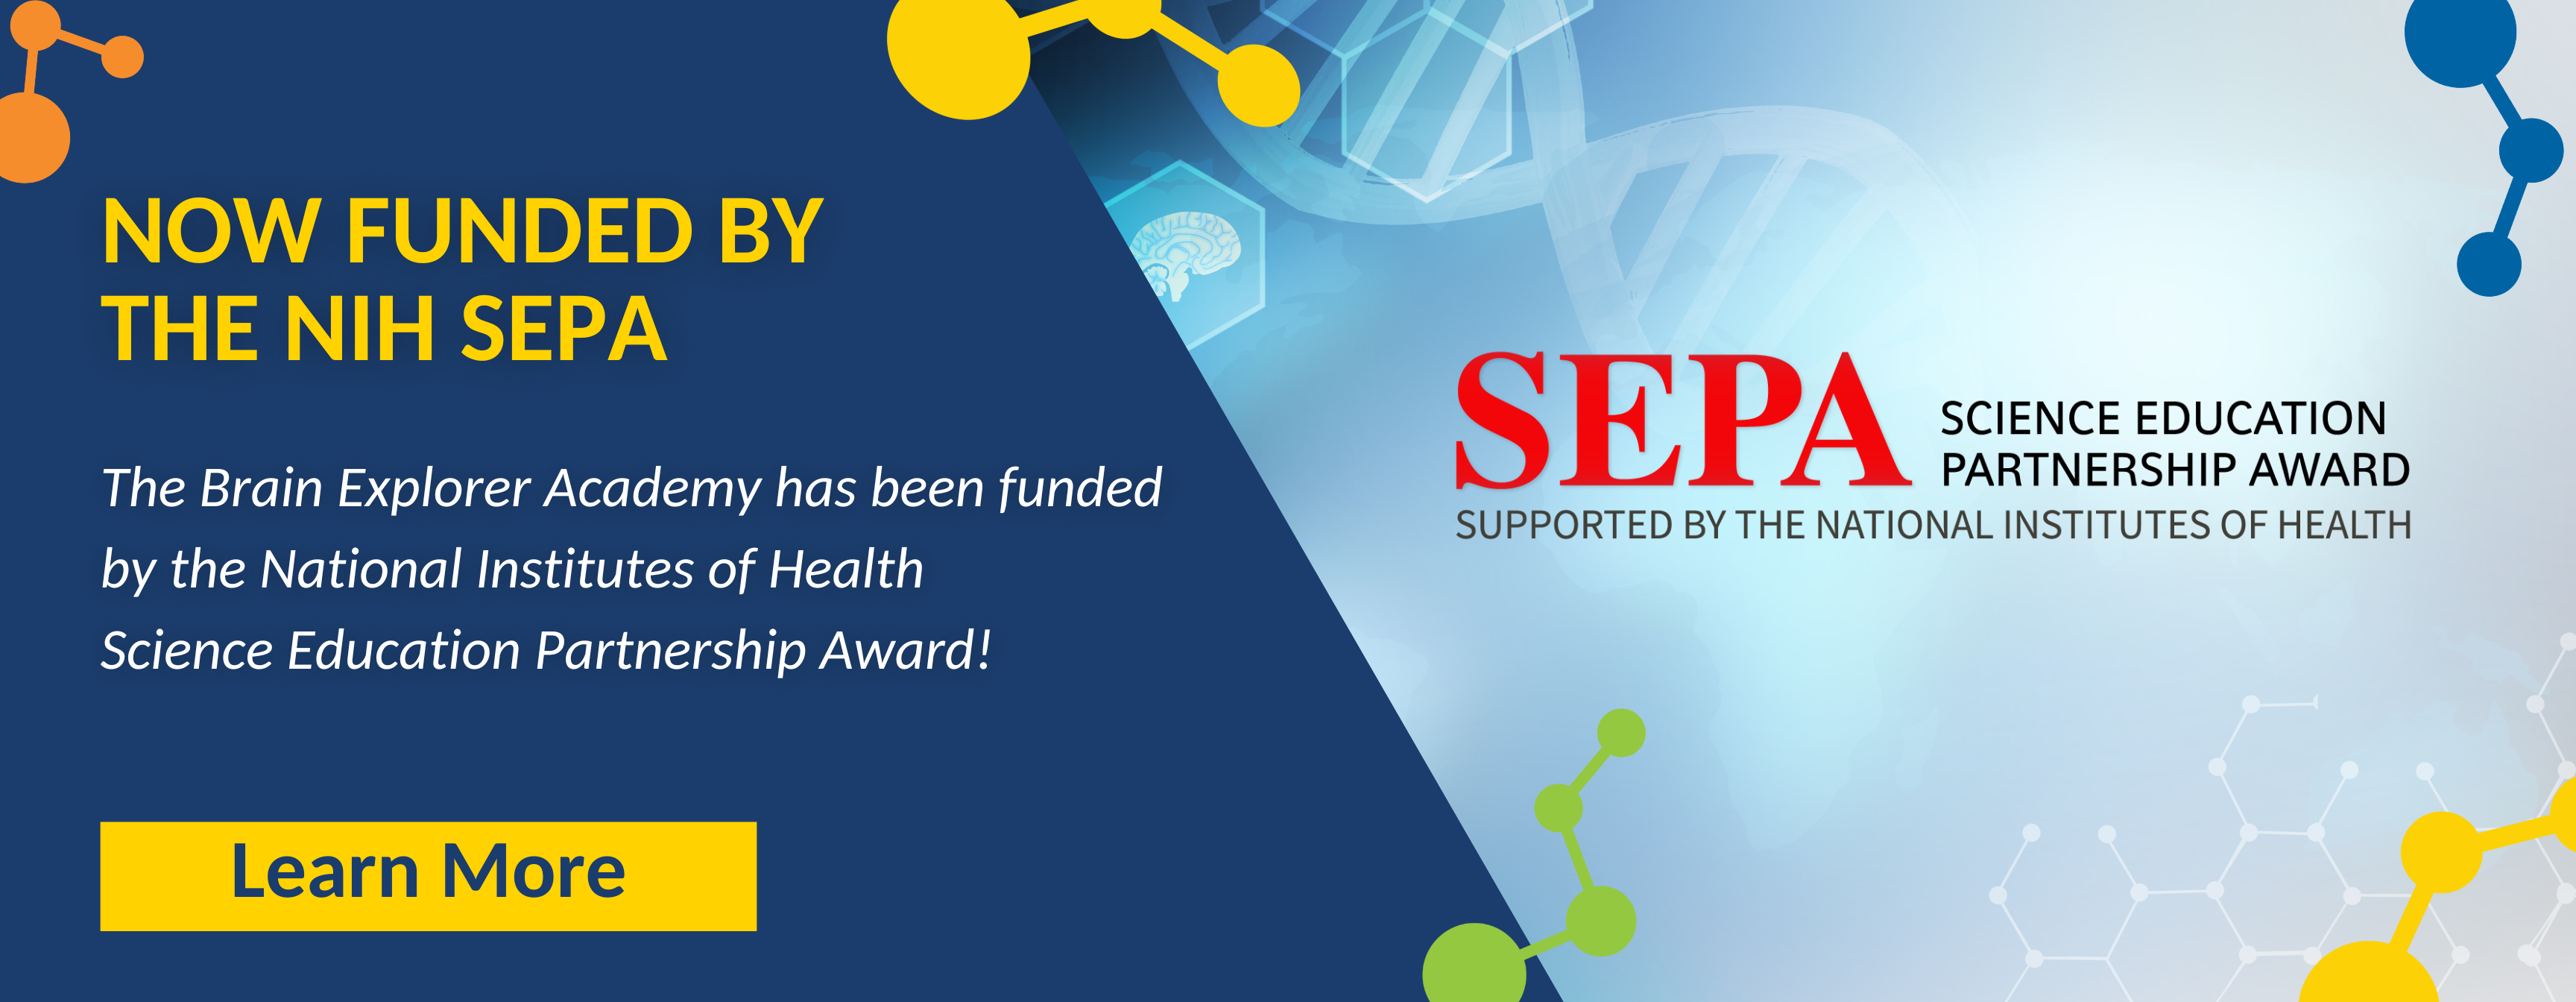 The Brain Explorer Academy is now funded by the NIH SEPA